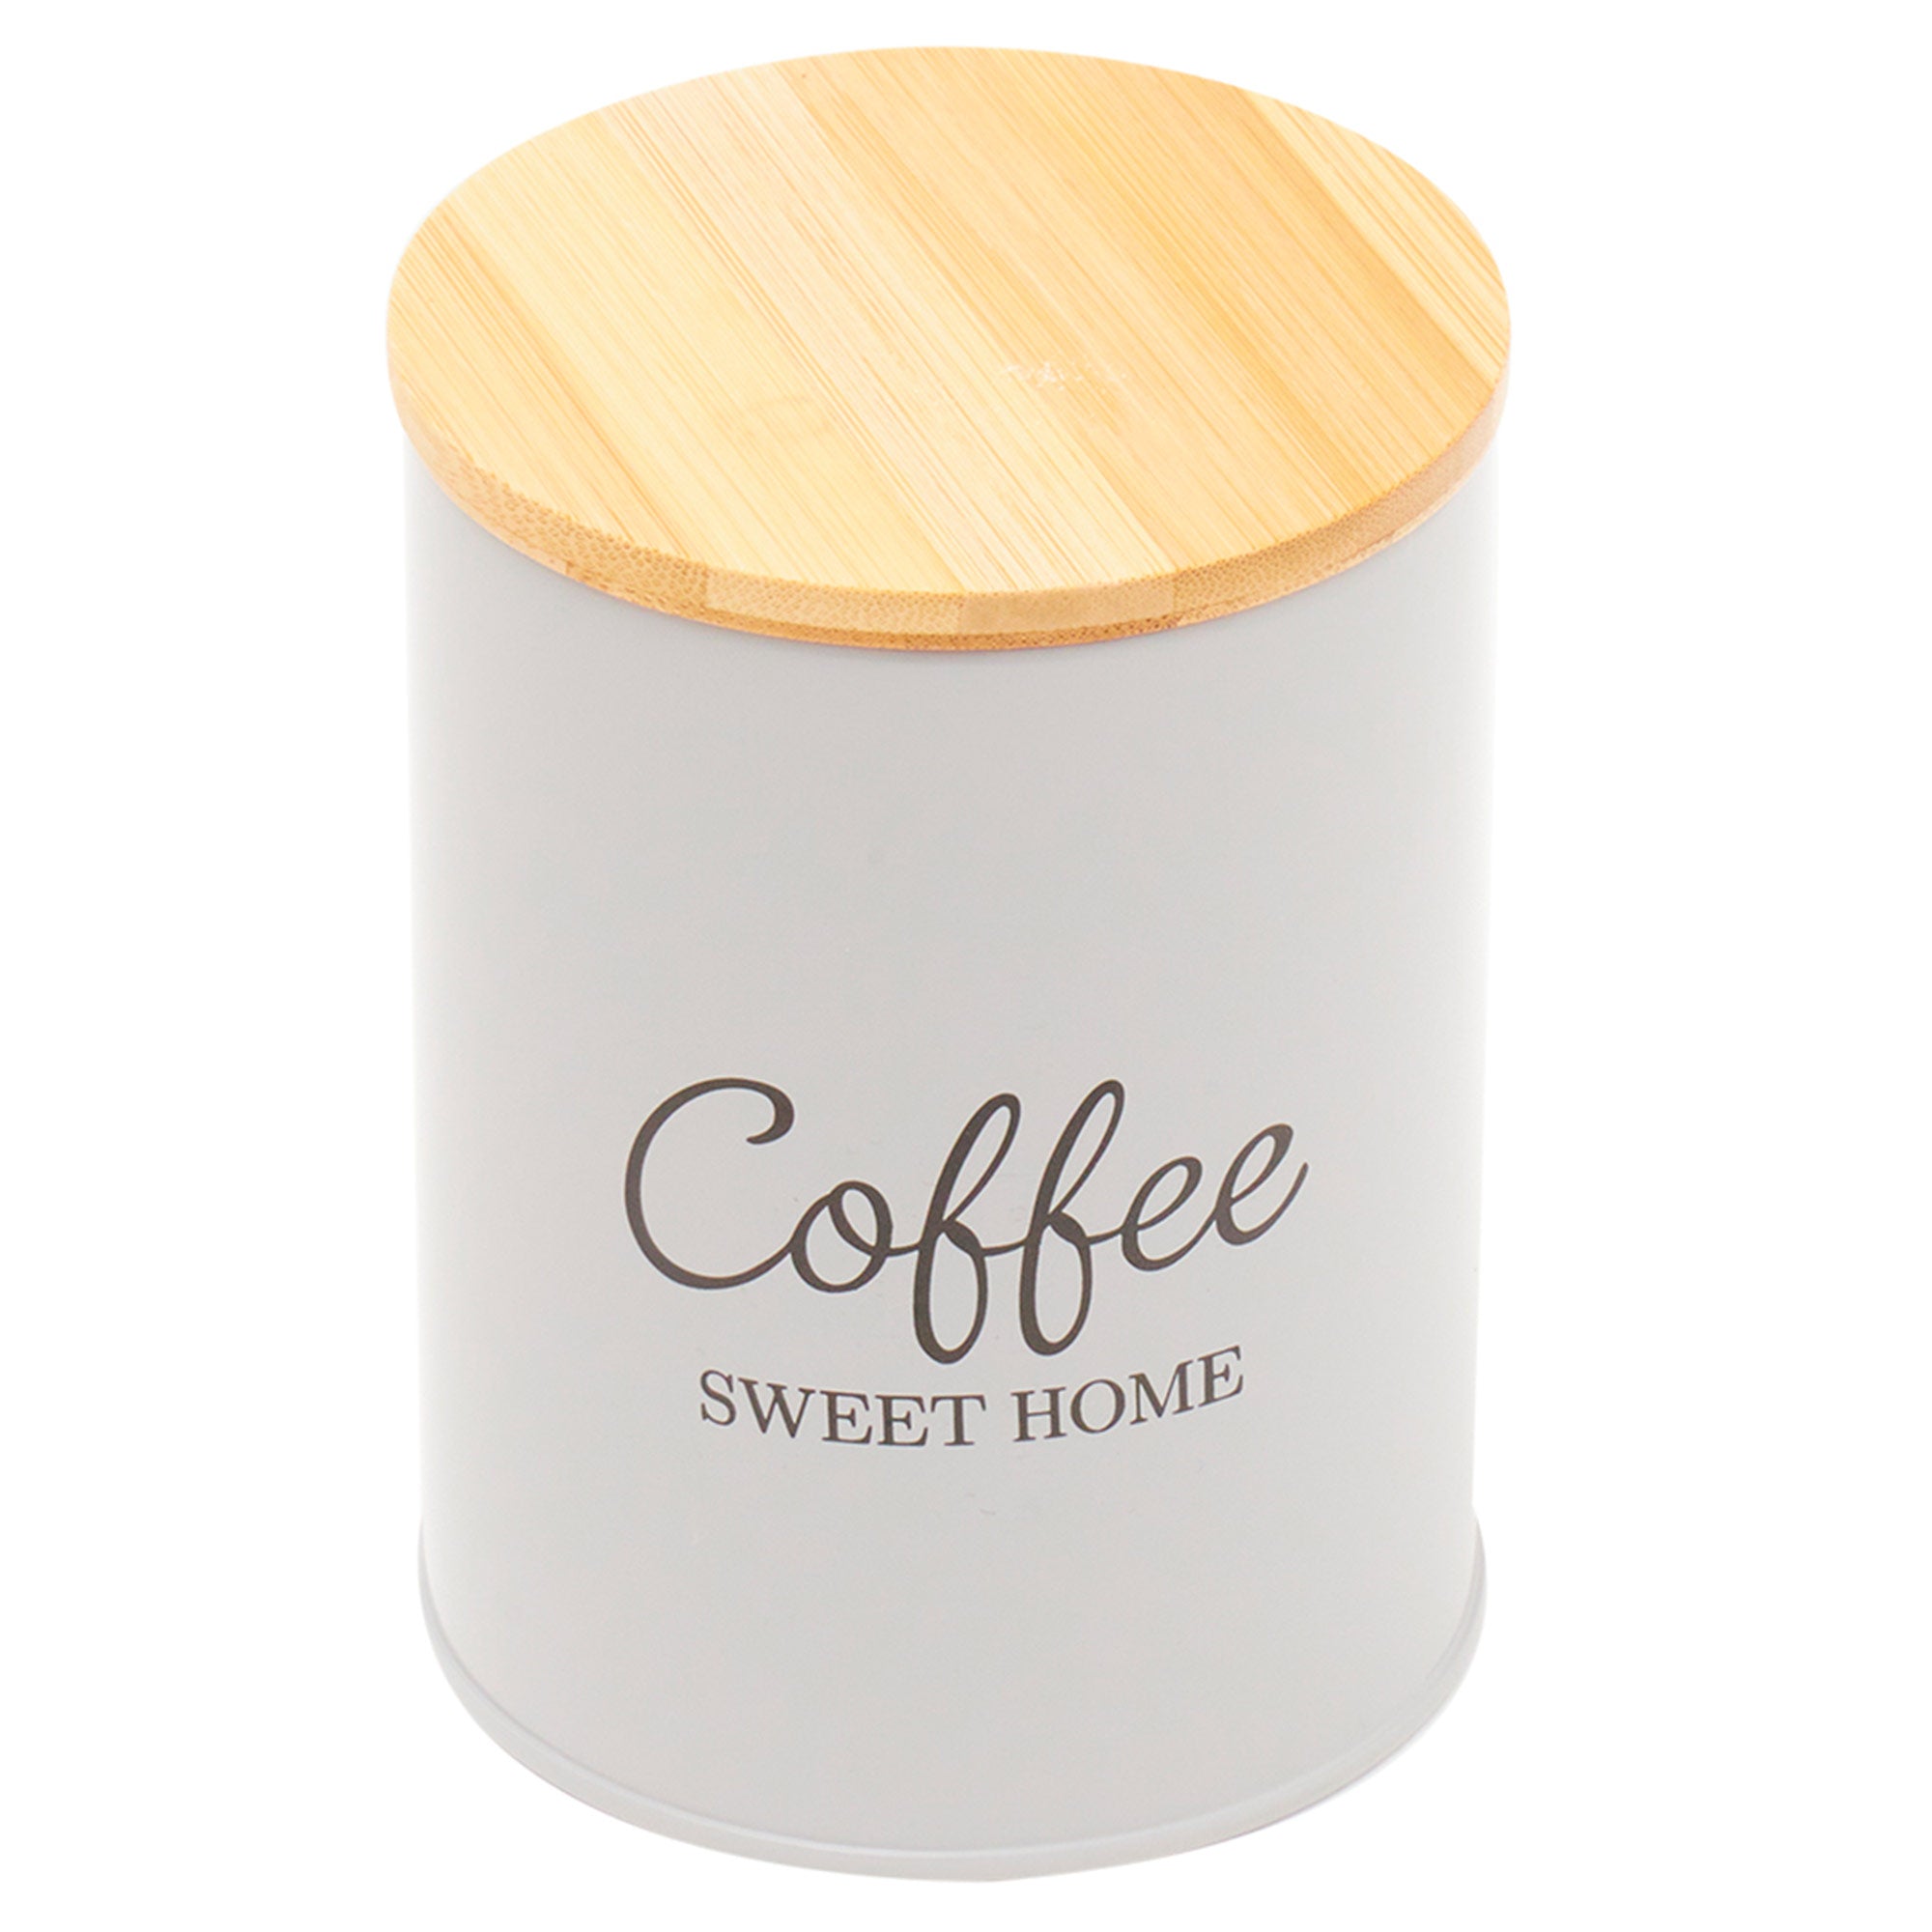 Home Basics Tin Kitchen Canister With Bamboo Top, Coffee, Bonny Grey, 3.75x5 Inches